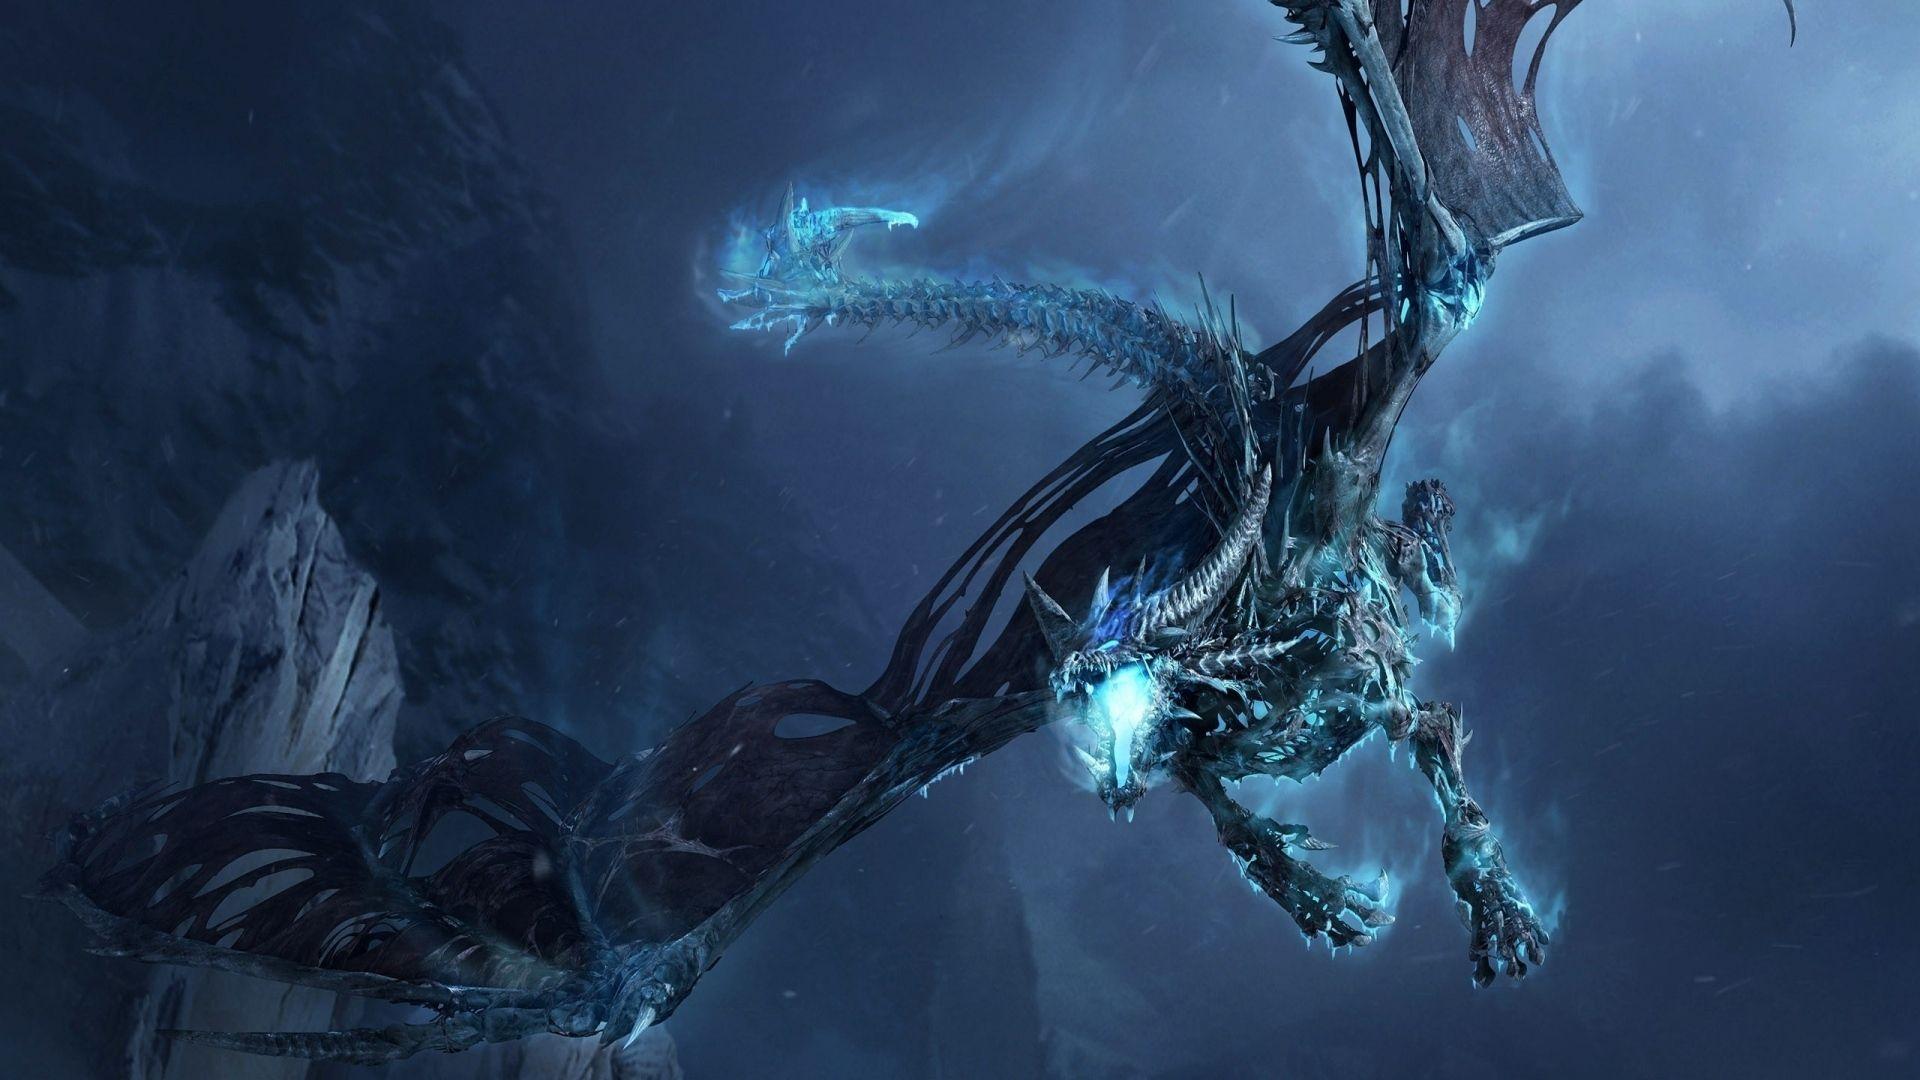 Cool Wallpapers Of Dragons 68 images